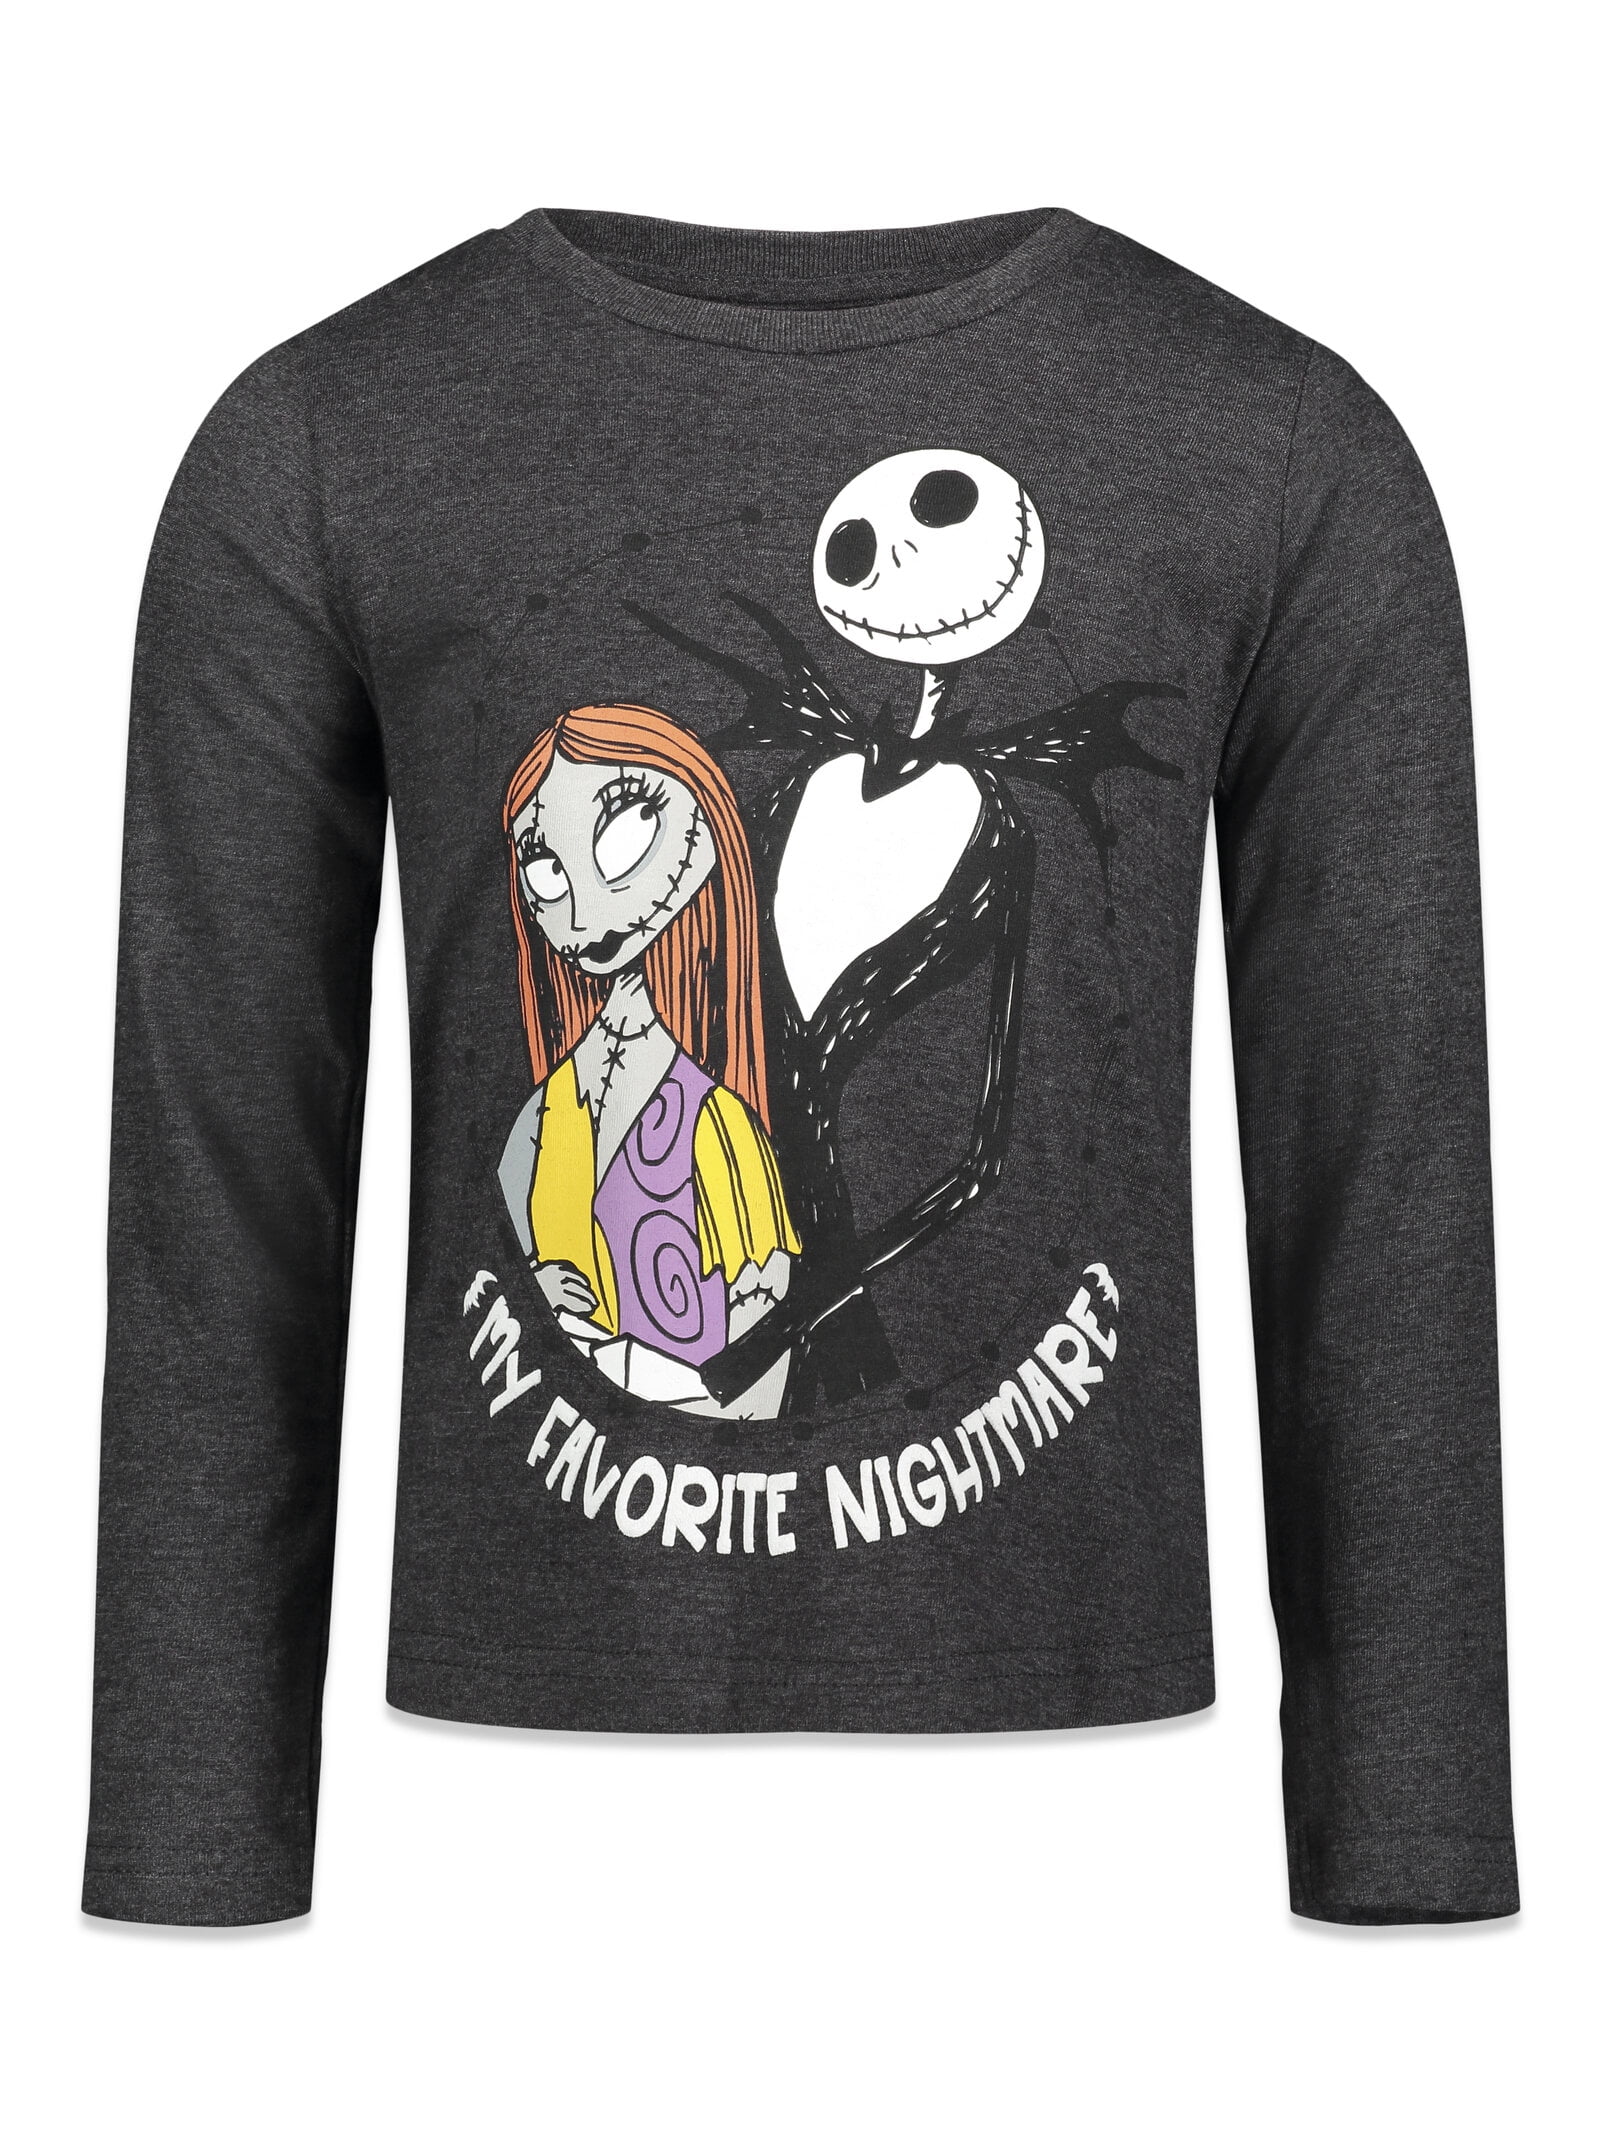  Disney Nightmare Before Christmas Toddler Girls Tie Knot T-Shirt  Legging Set 2T: Clothing, Shoes & Jewelry